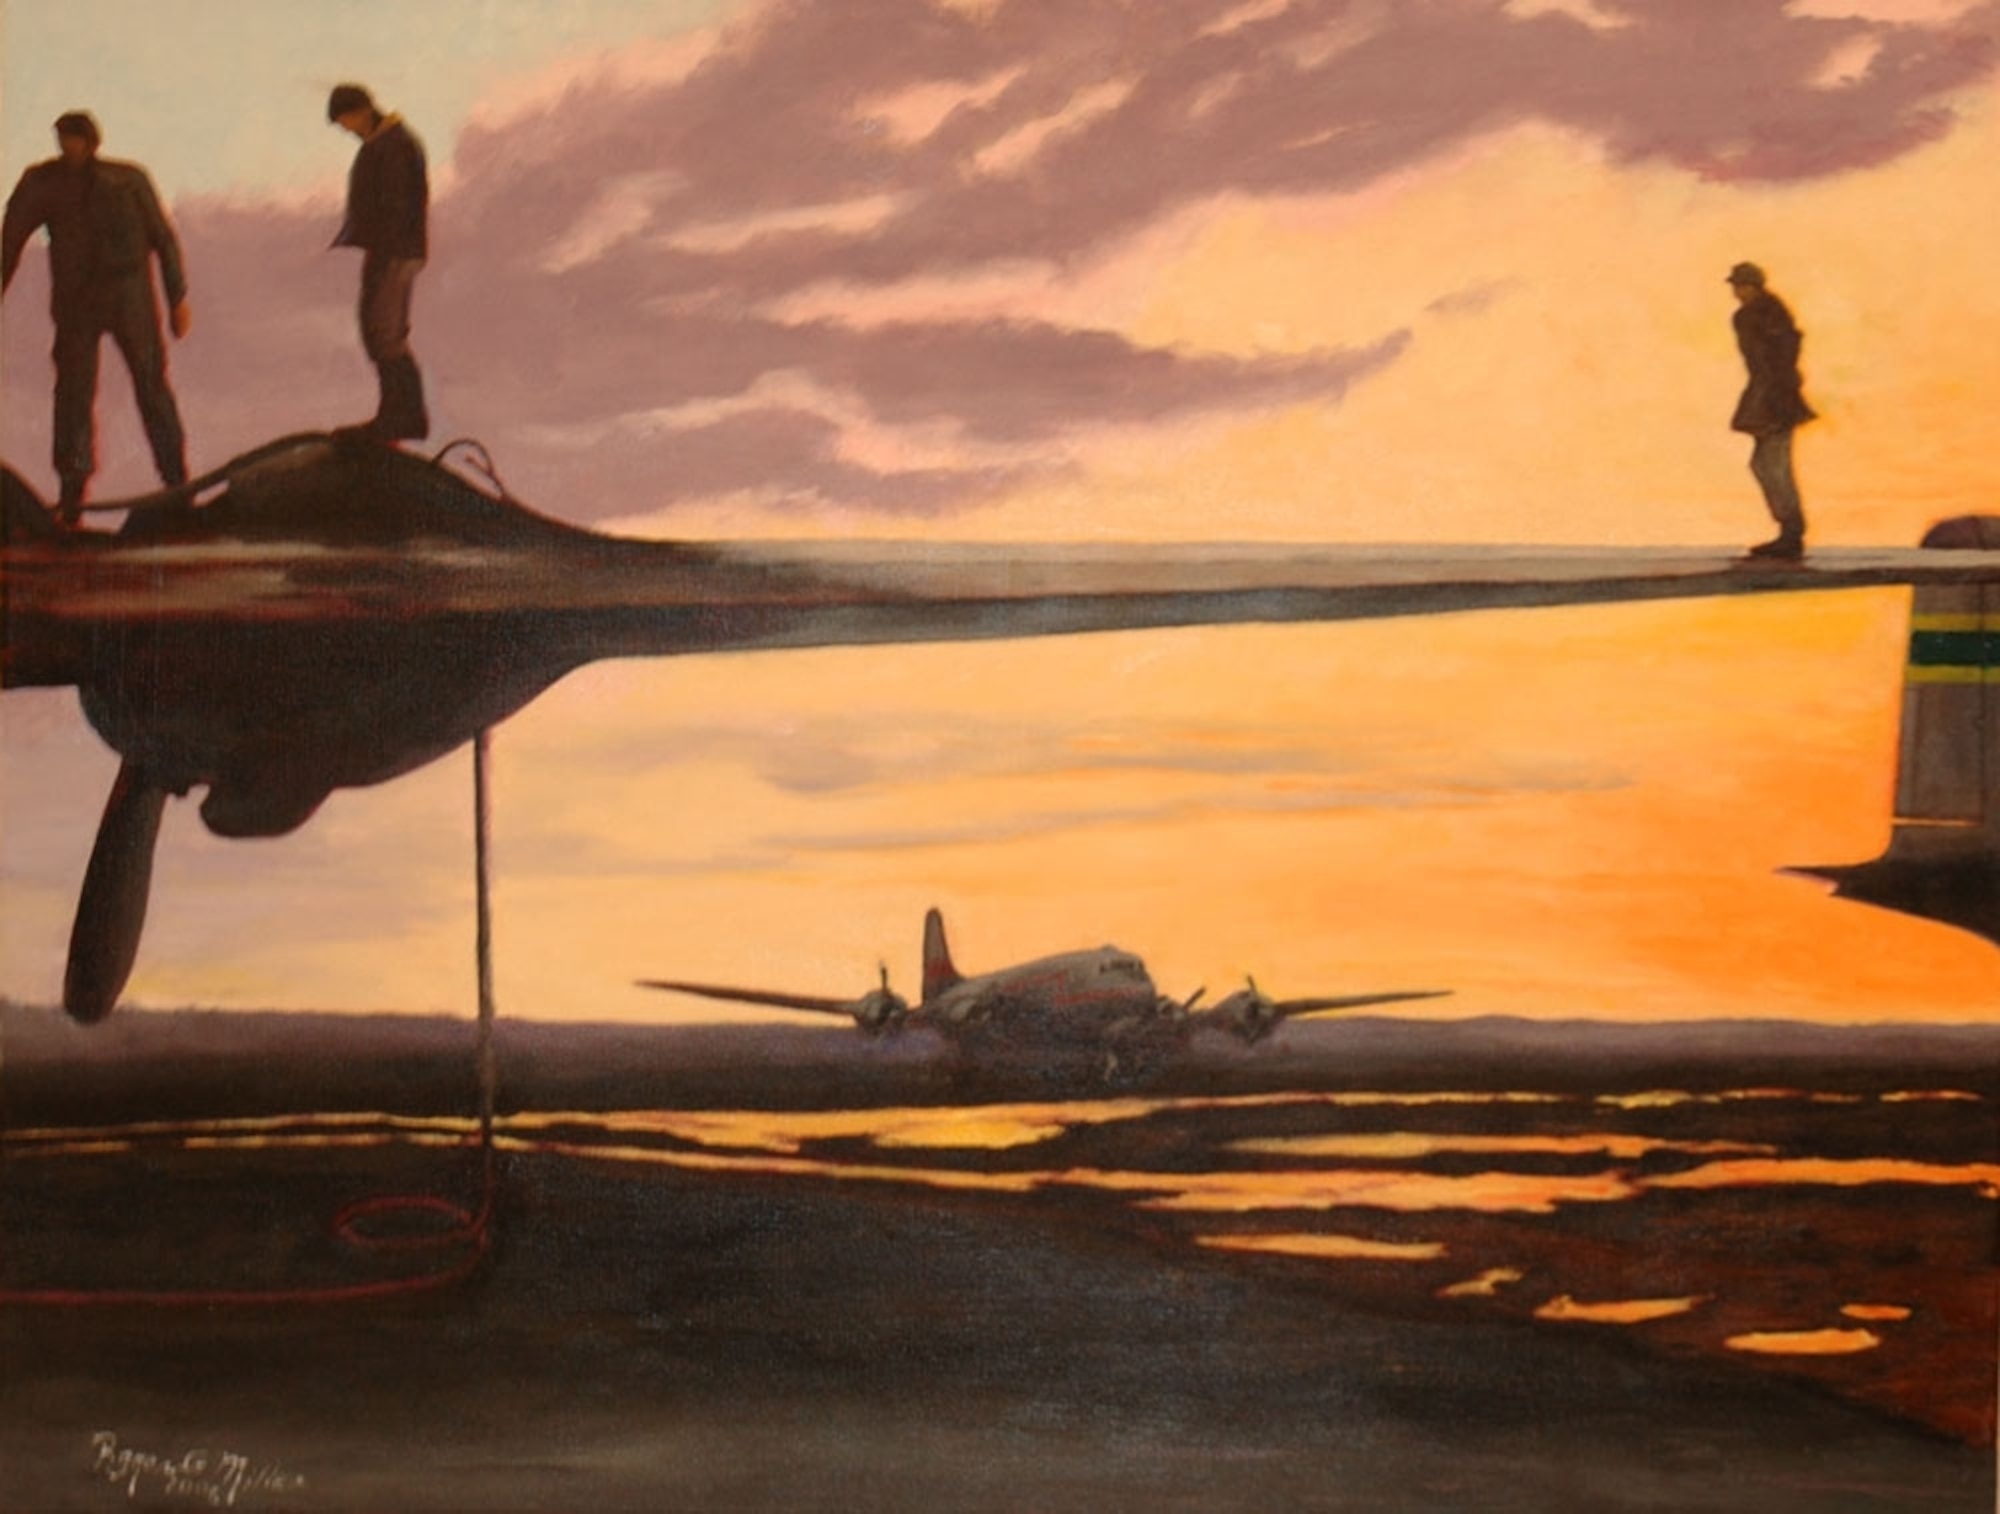 Painting by Dr. Roger Miller, AFHSO
Air Force Art